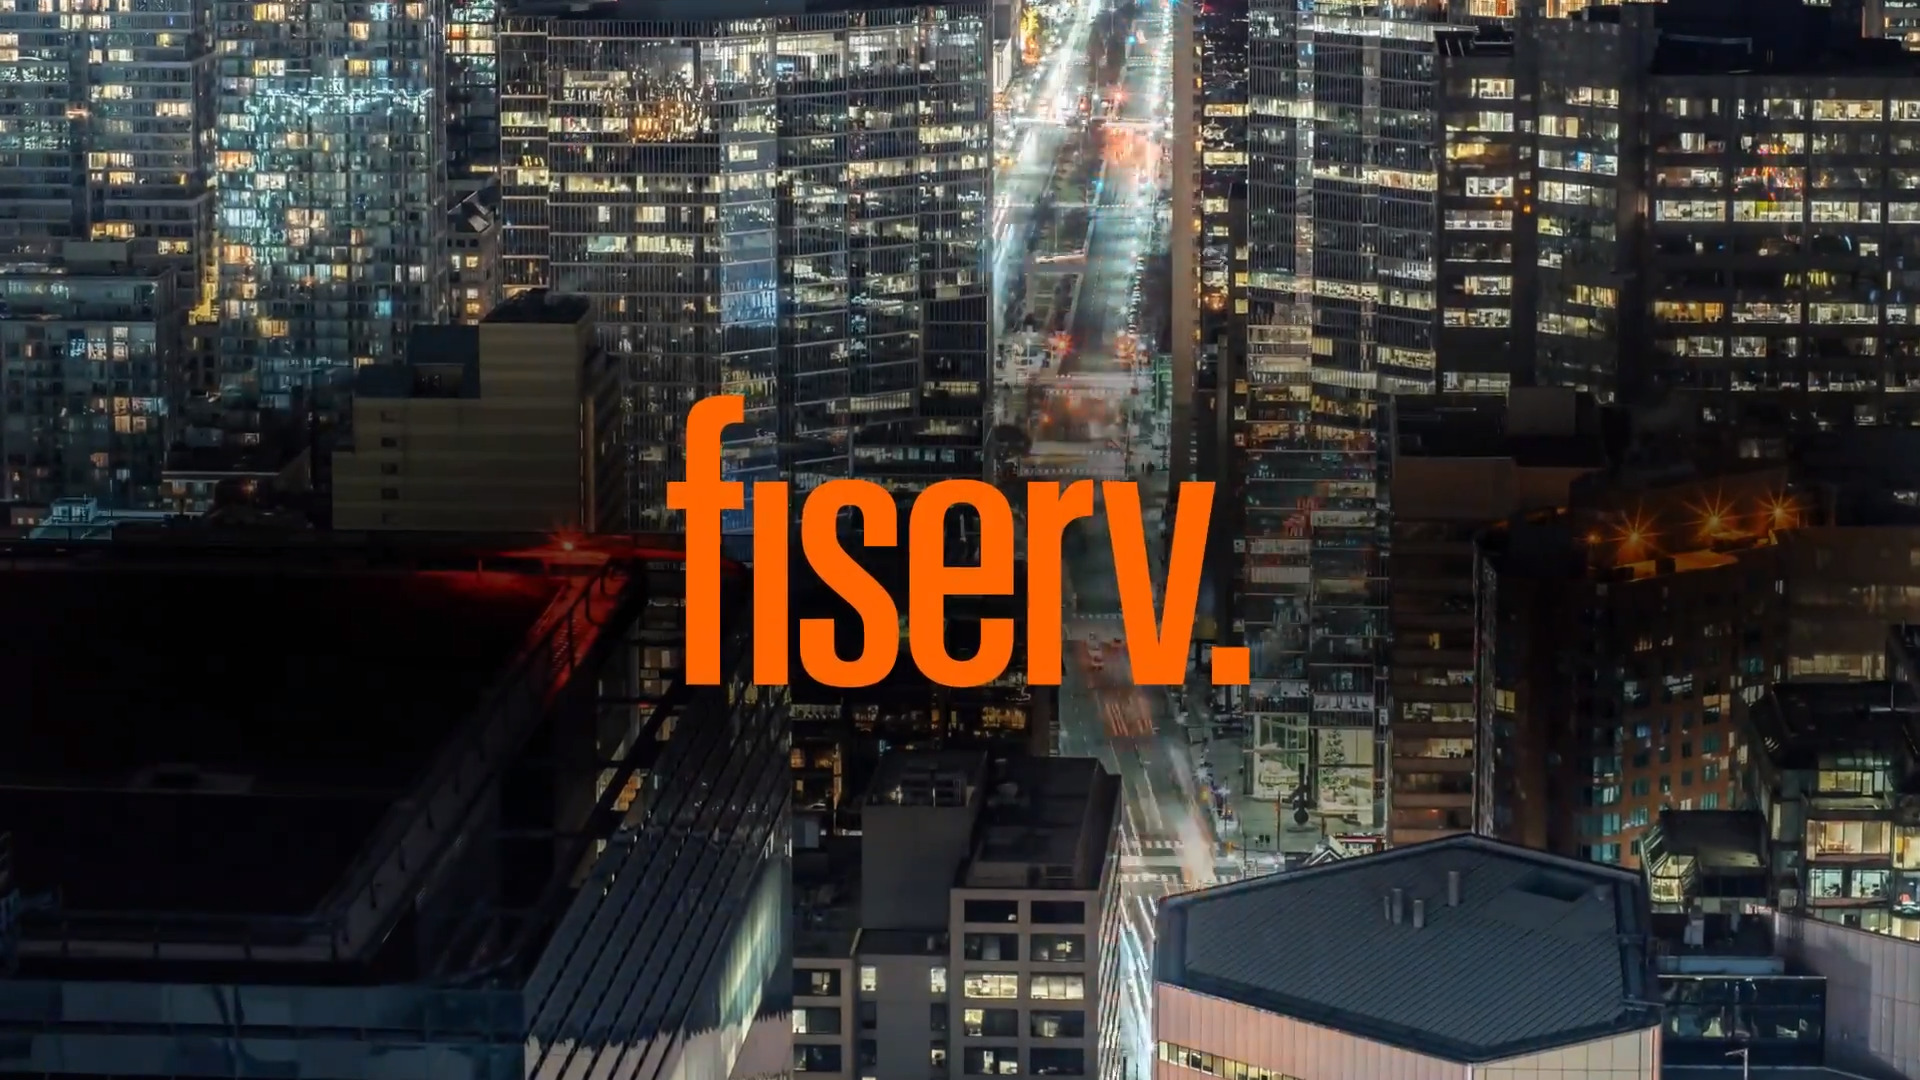 Fiserv is one of the leading B2B companies in FinTech